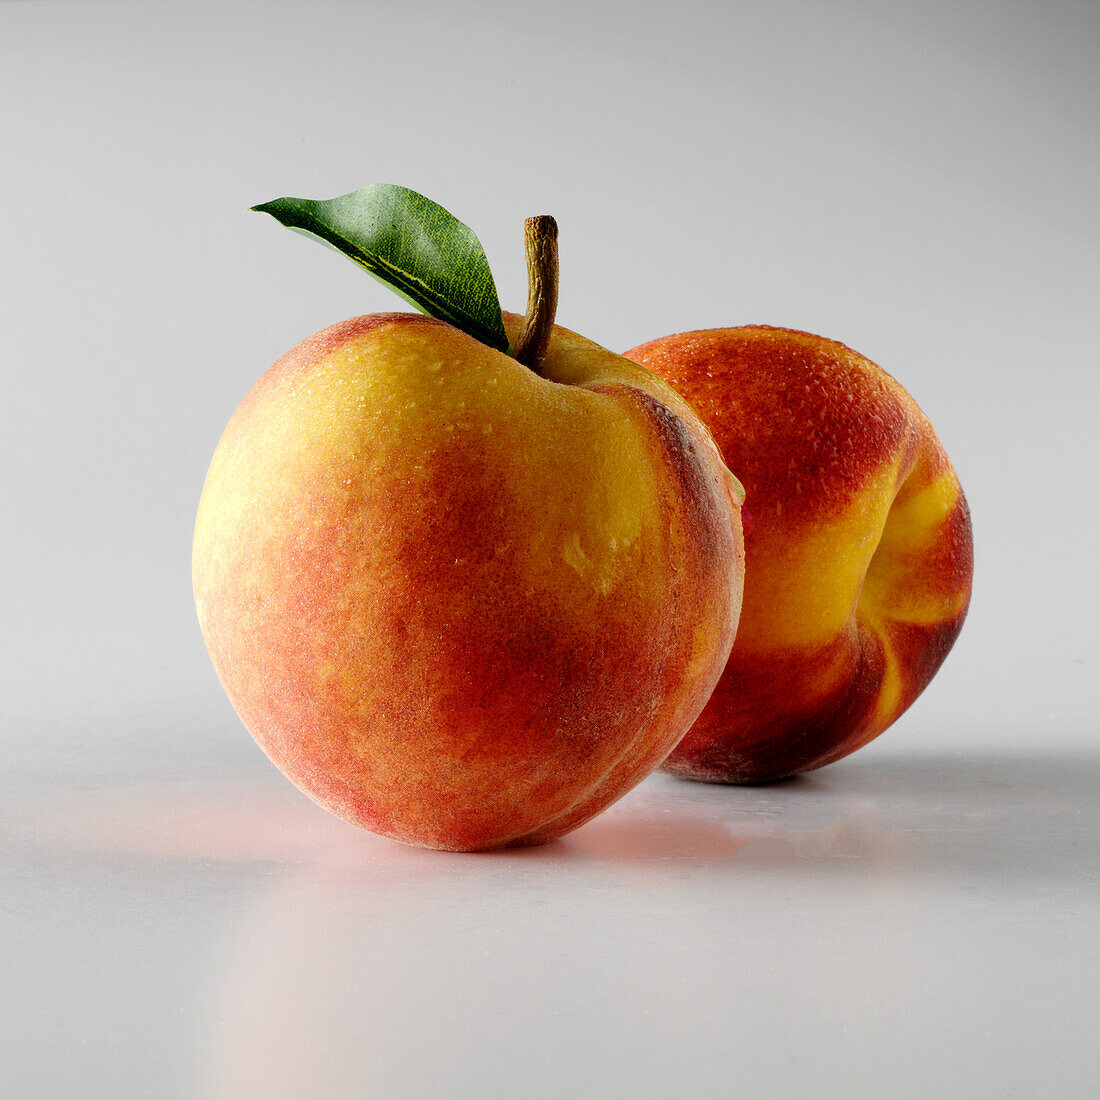 Two peaches on a white background